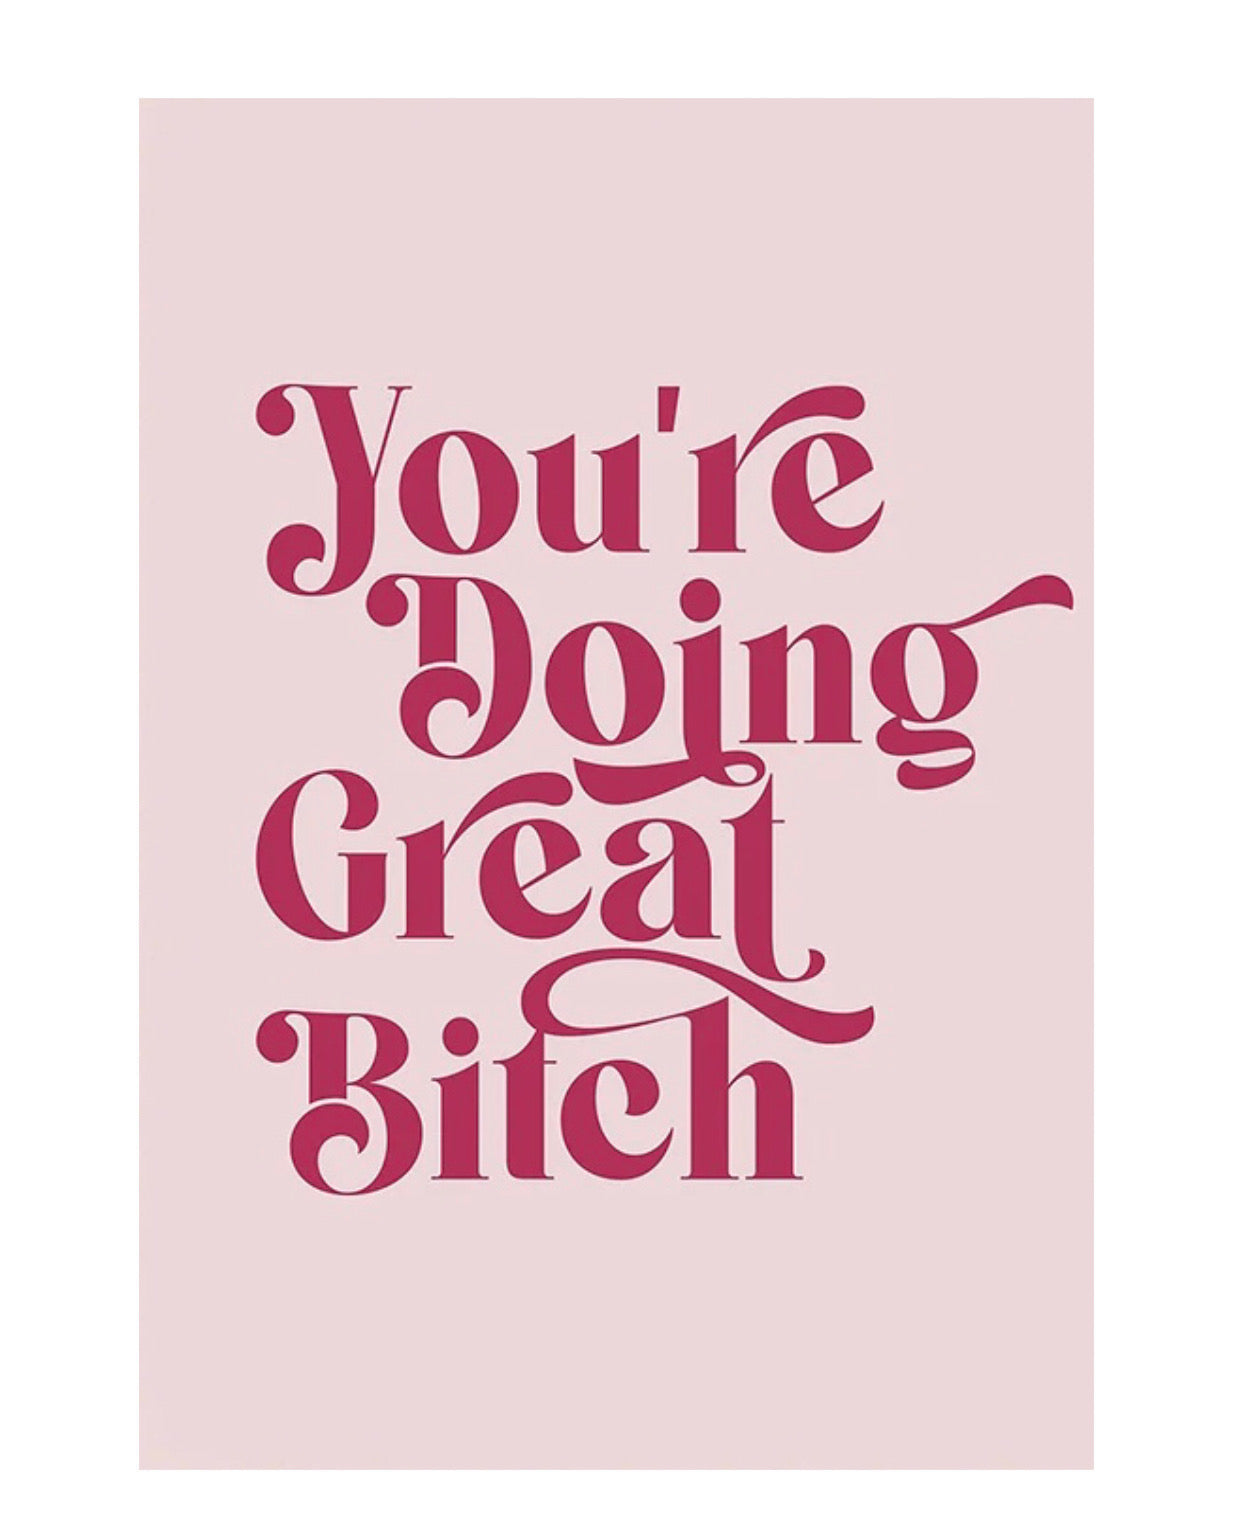 "you're doing great bitch" poster